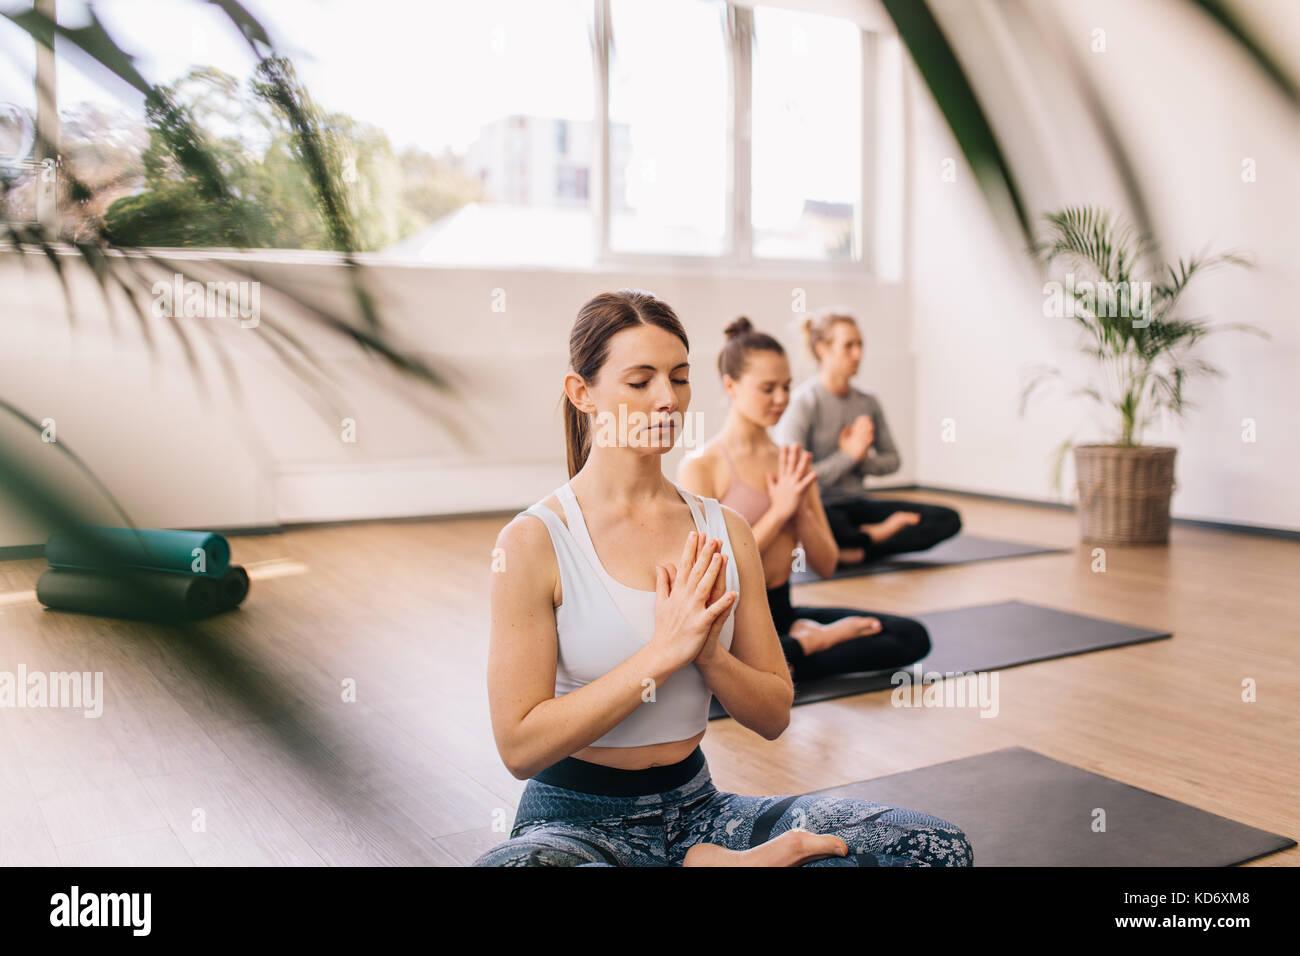 Fitness people sitting on floor with legs crossed and hands joined. Group of young people meditating in lotus pose at yoga class. Stock Photo